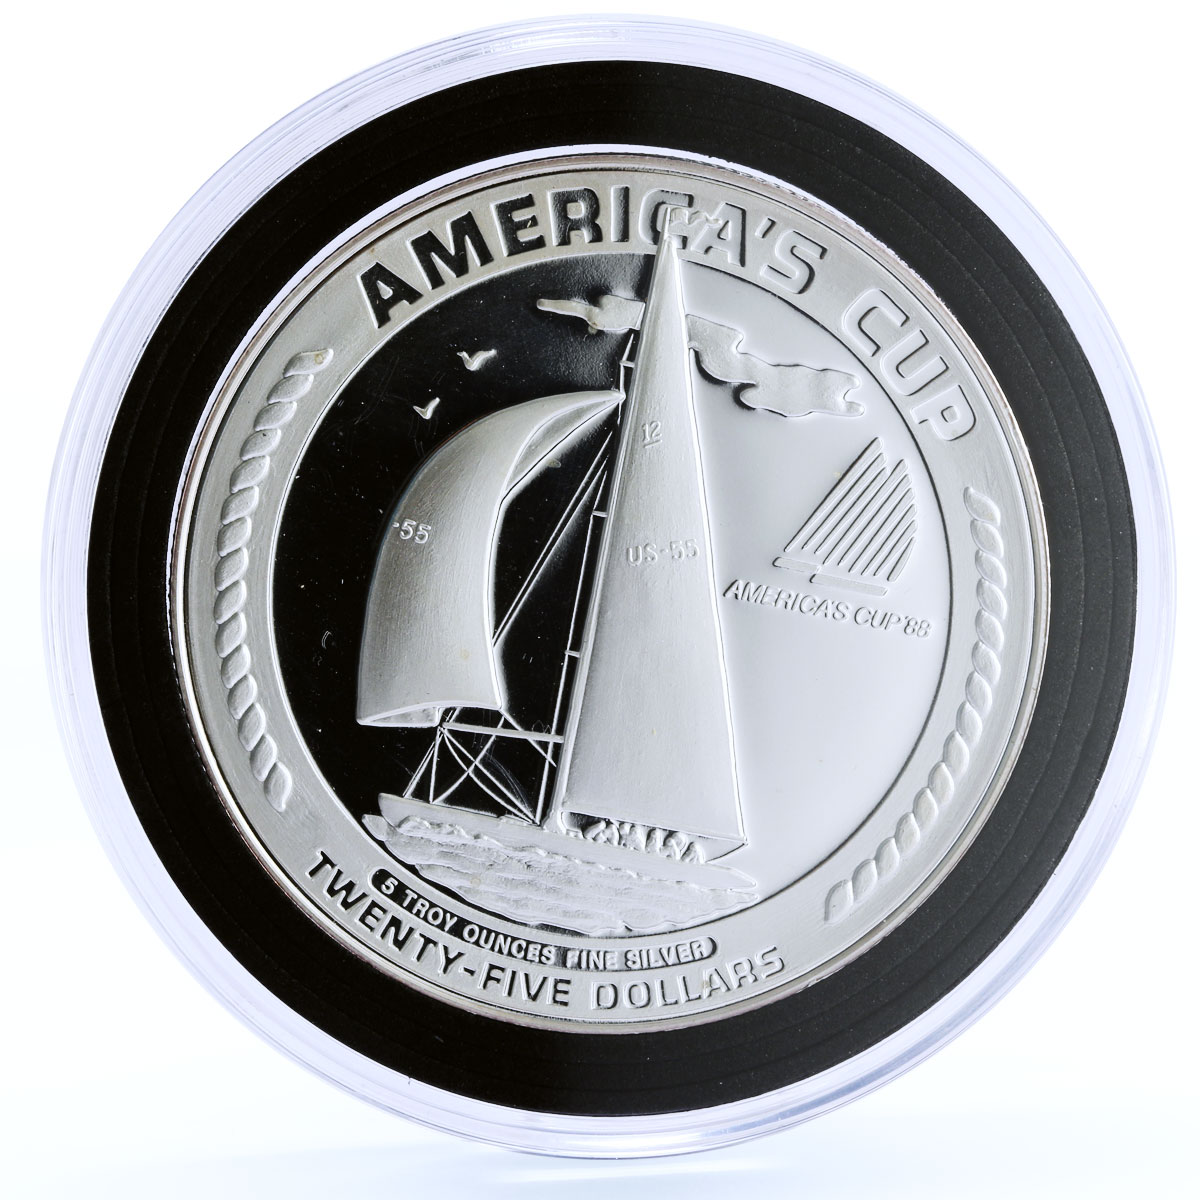 Samoa 25 dollars Americas Yachting Cup Sailboat Sports proof silver coin 1988